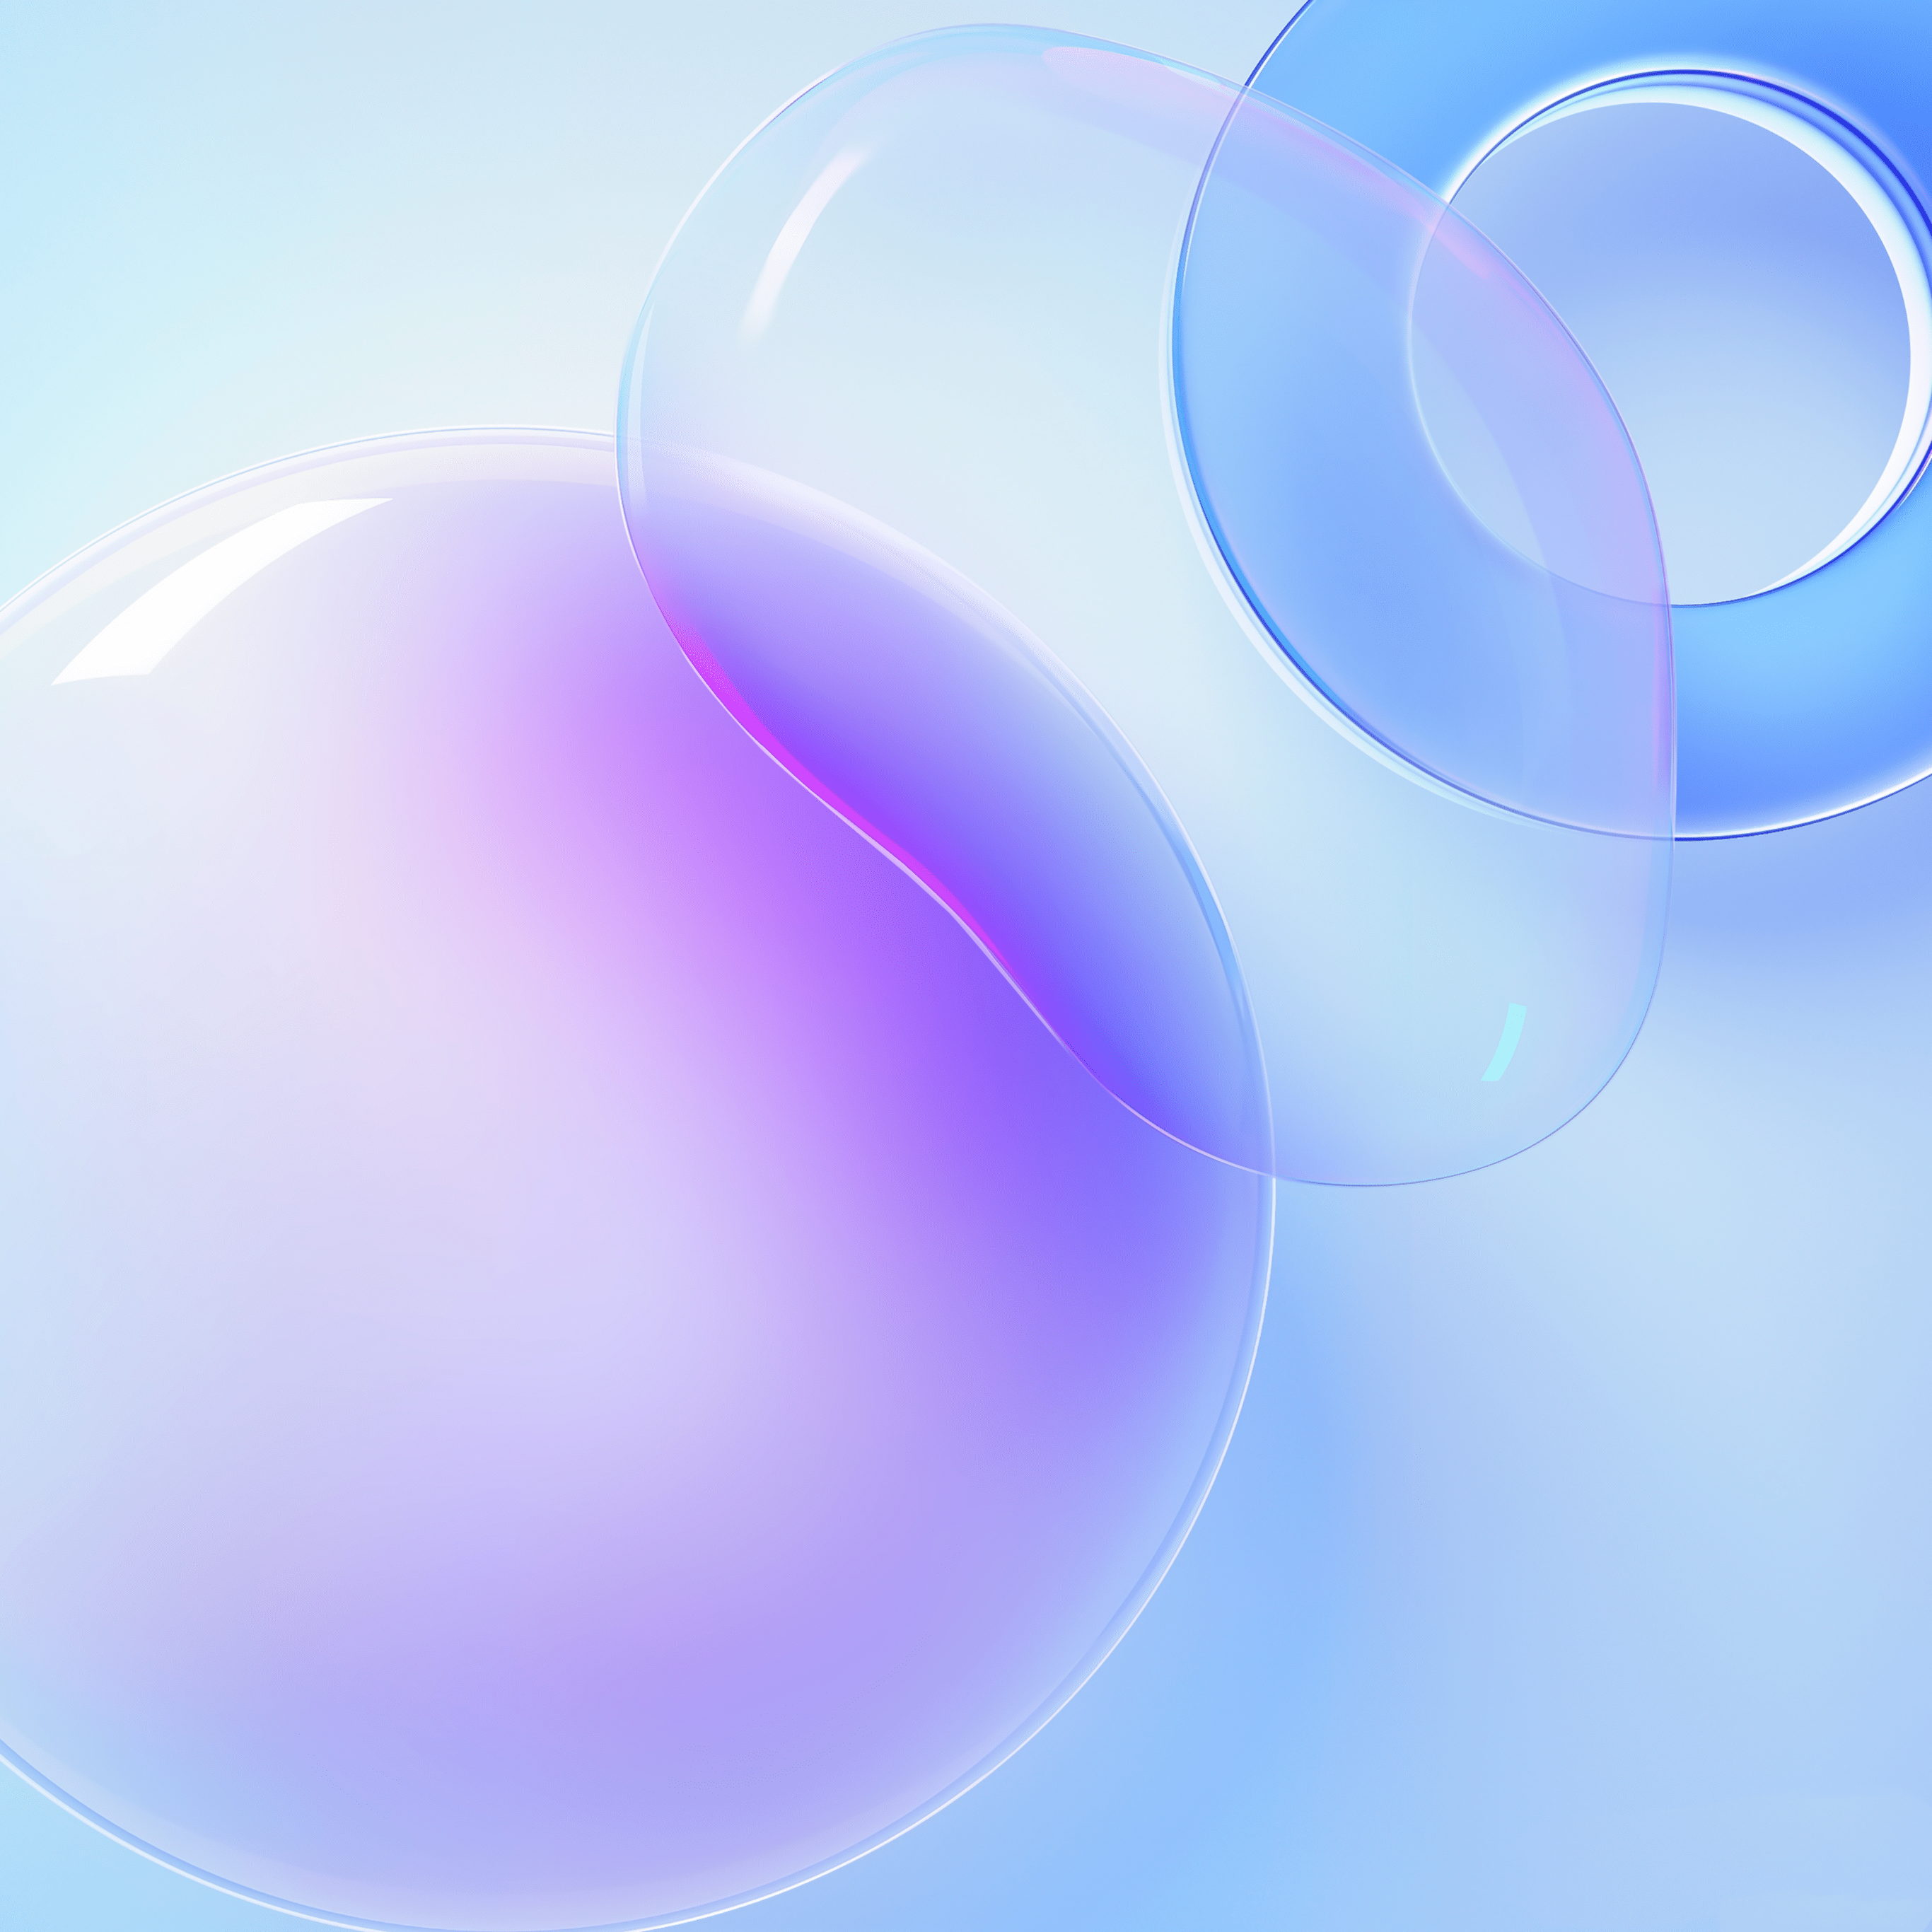 A blue and purple abstract image of soap bubbles - Bubbles